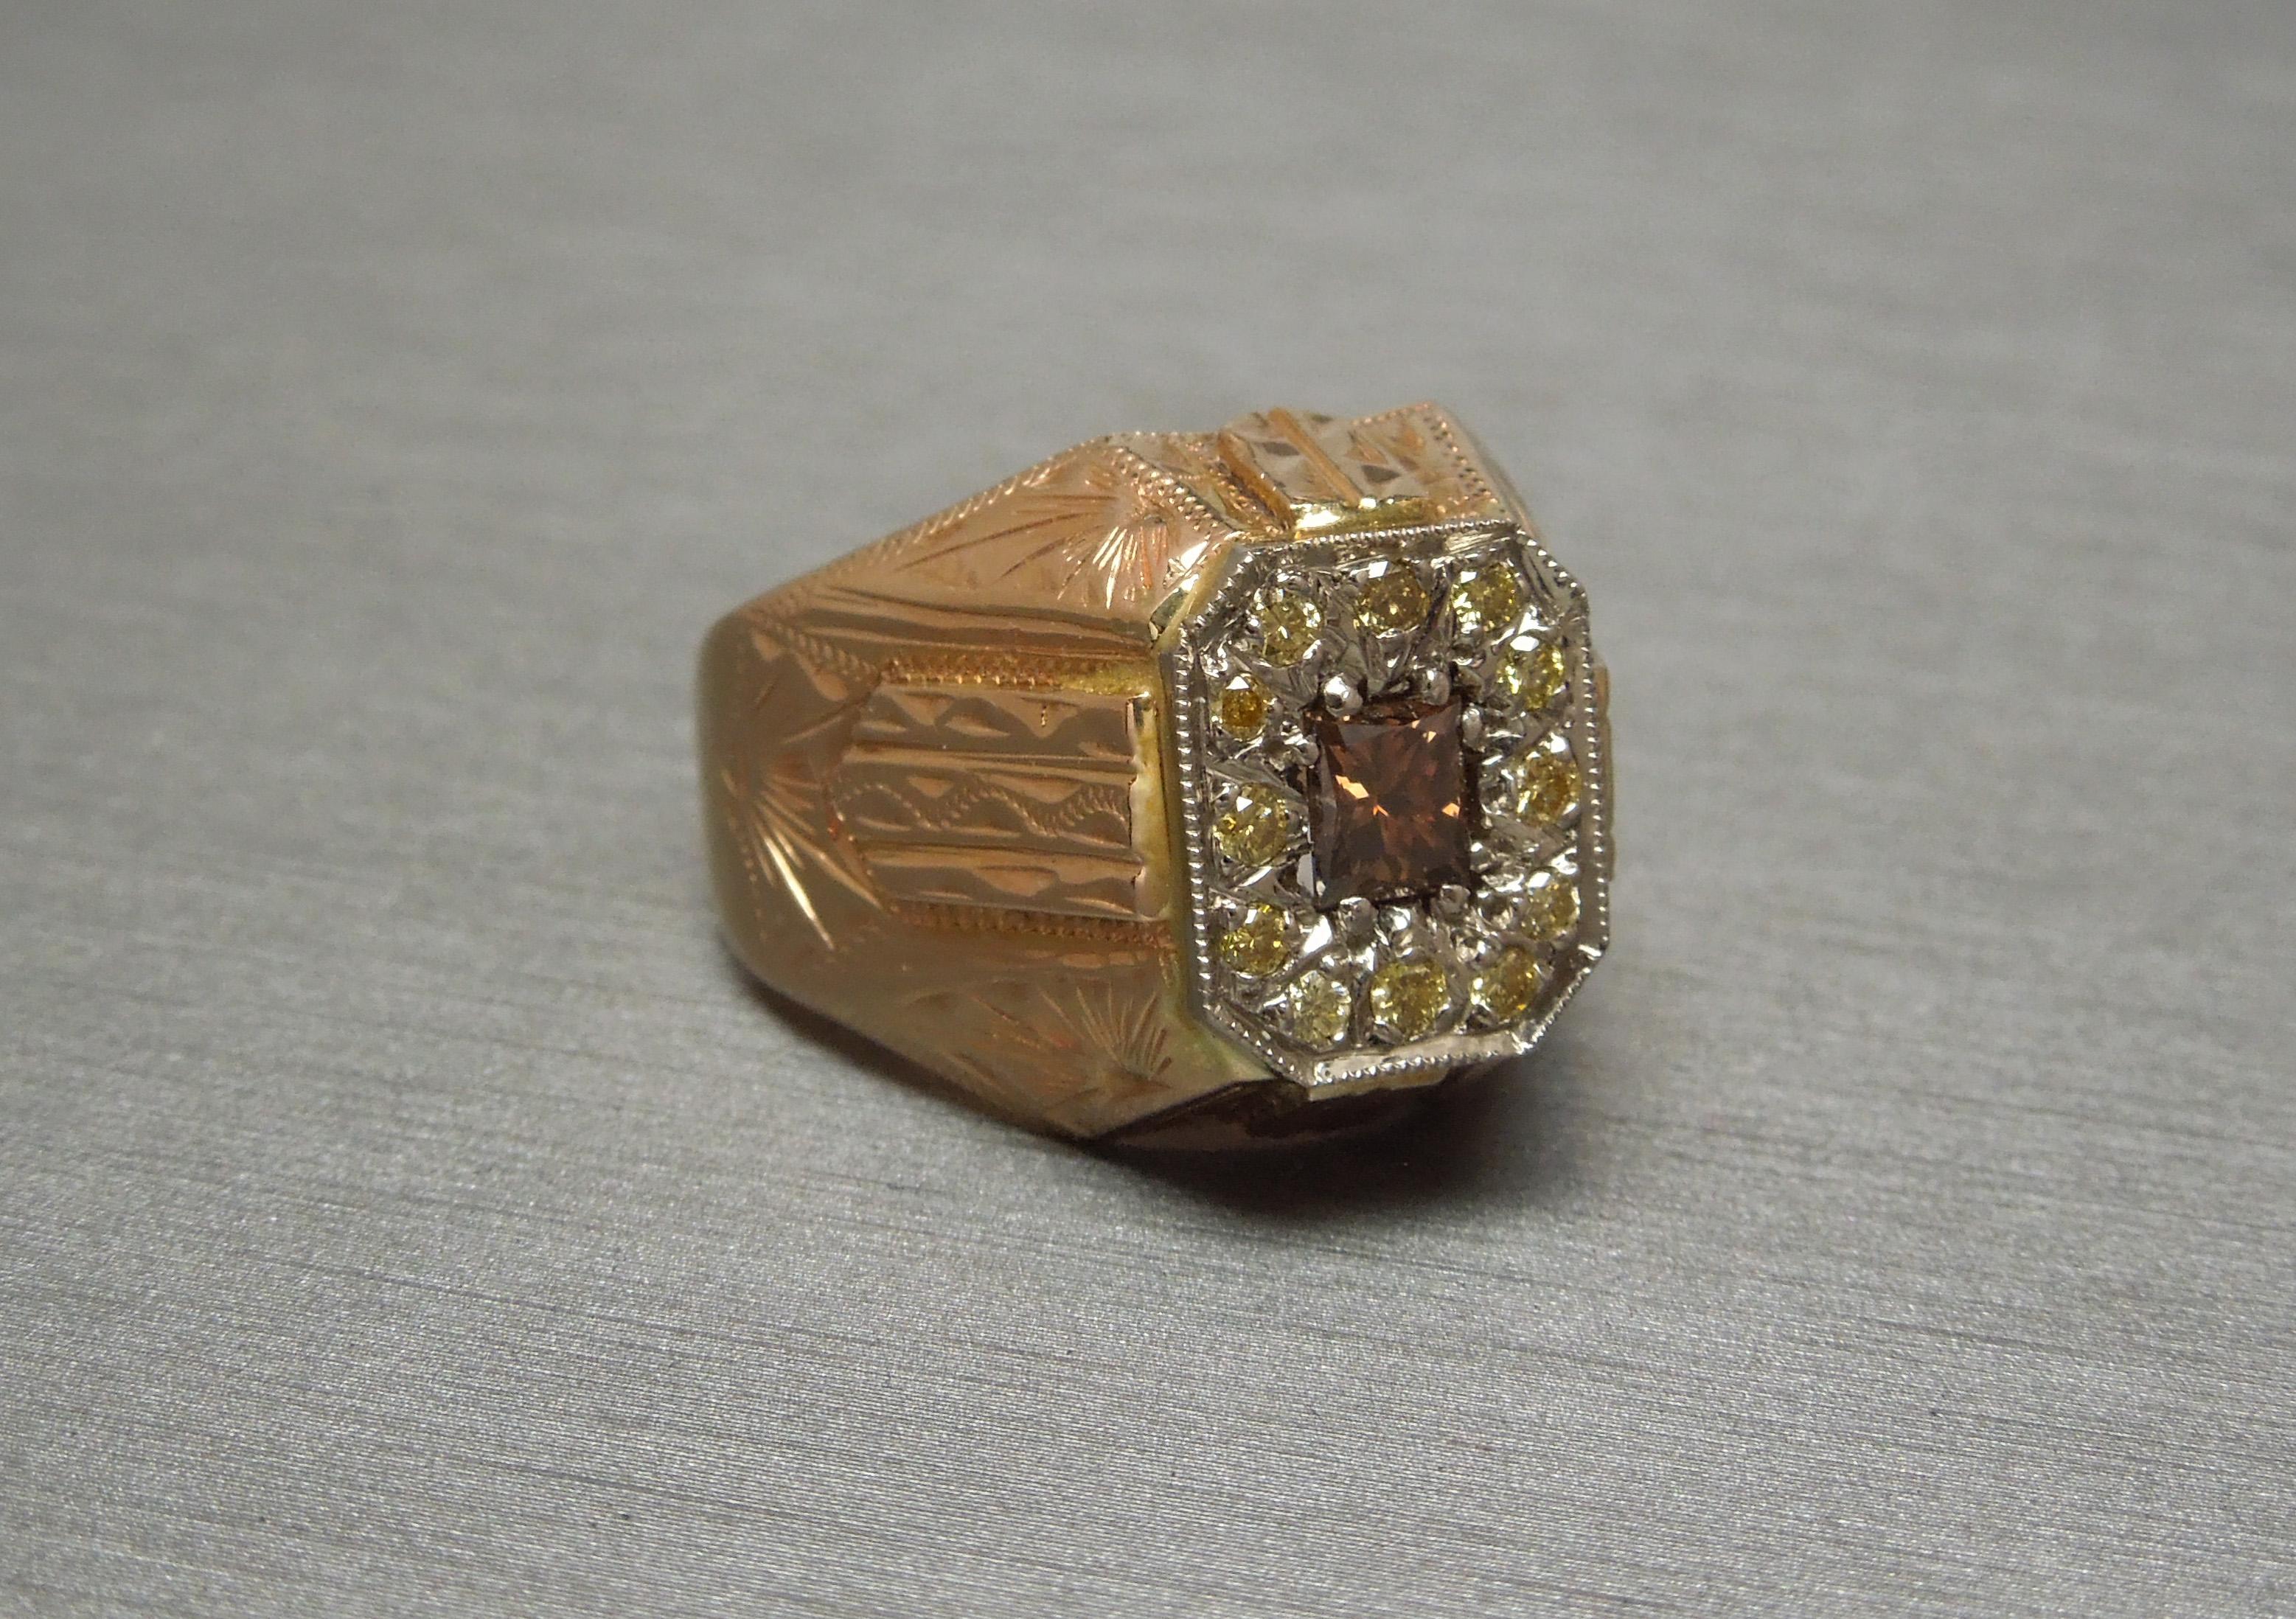 This Men's Diamond Pyramid Ring is crafted in an Egyptian Revival style inspired by Art Deco construction. In 14KT Gold with a slight rosy tinge, giving the appearance of Rose Gold - with a 14KT White Gold plate encasing Diamonds. Representing an